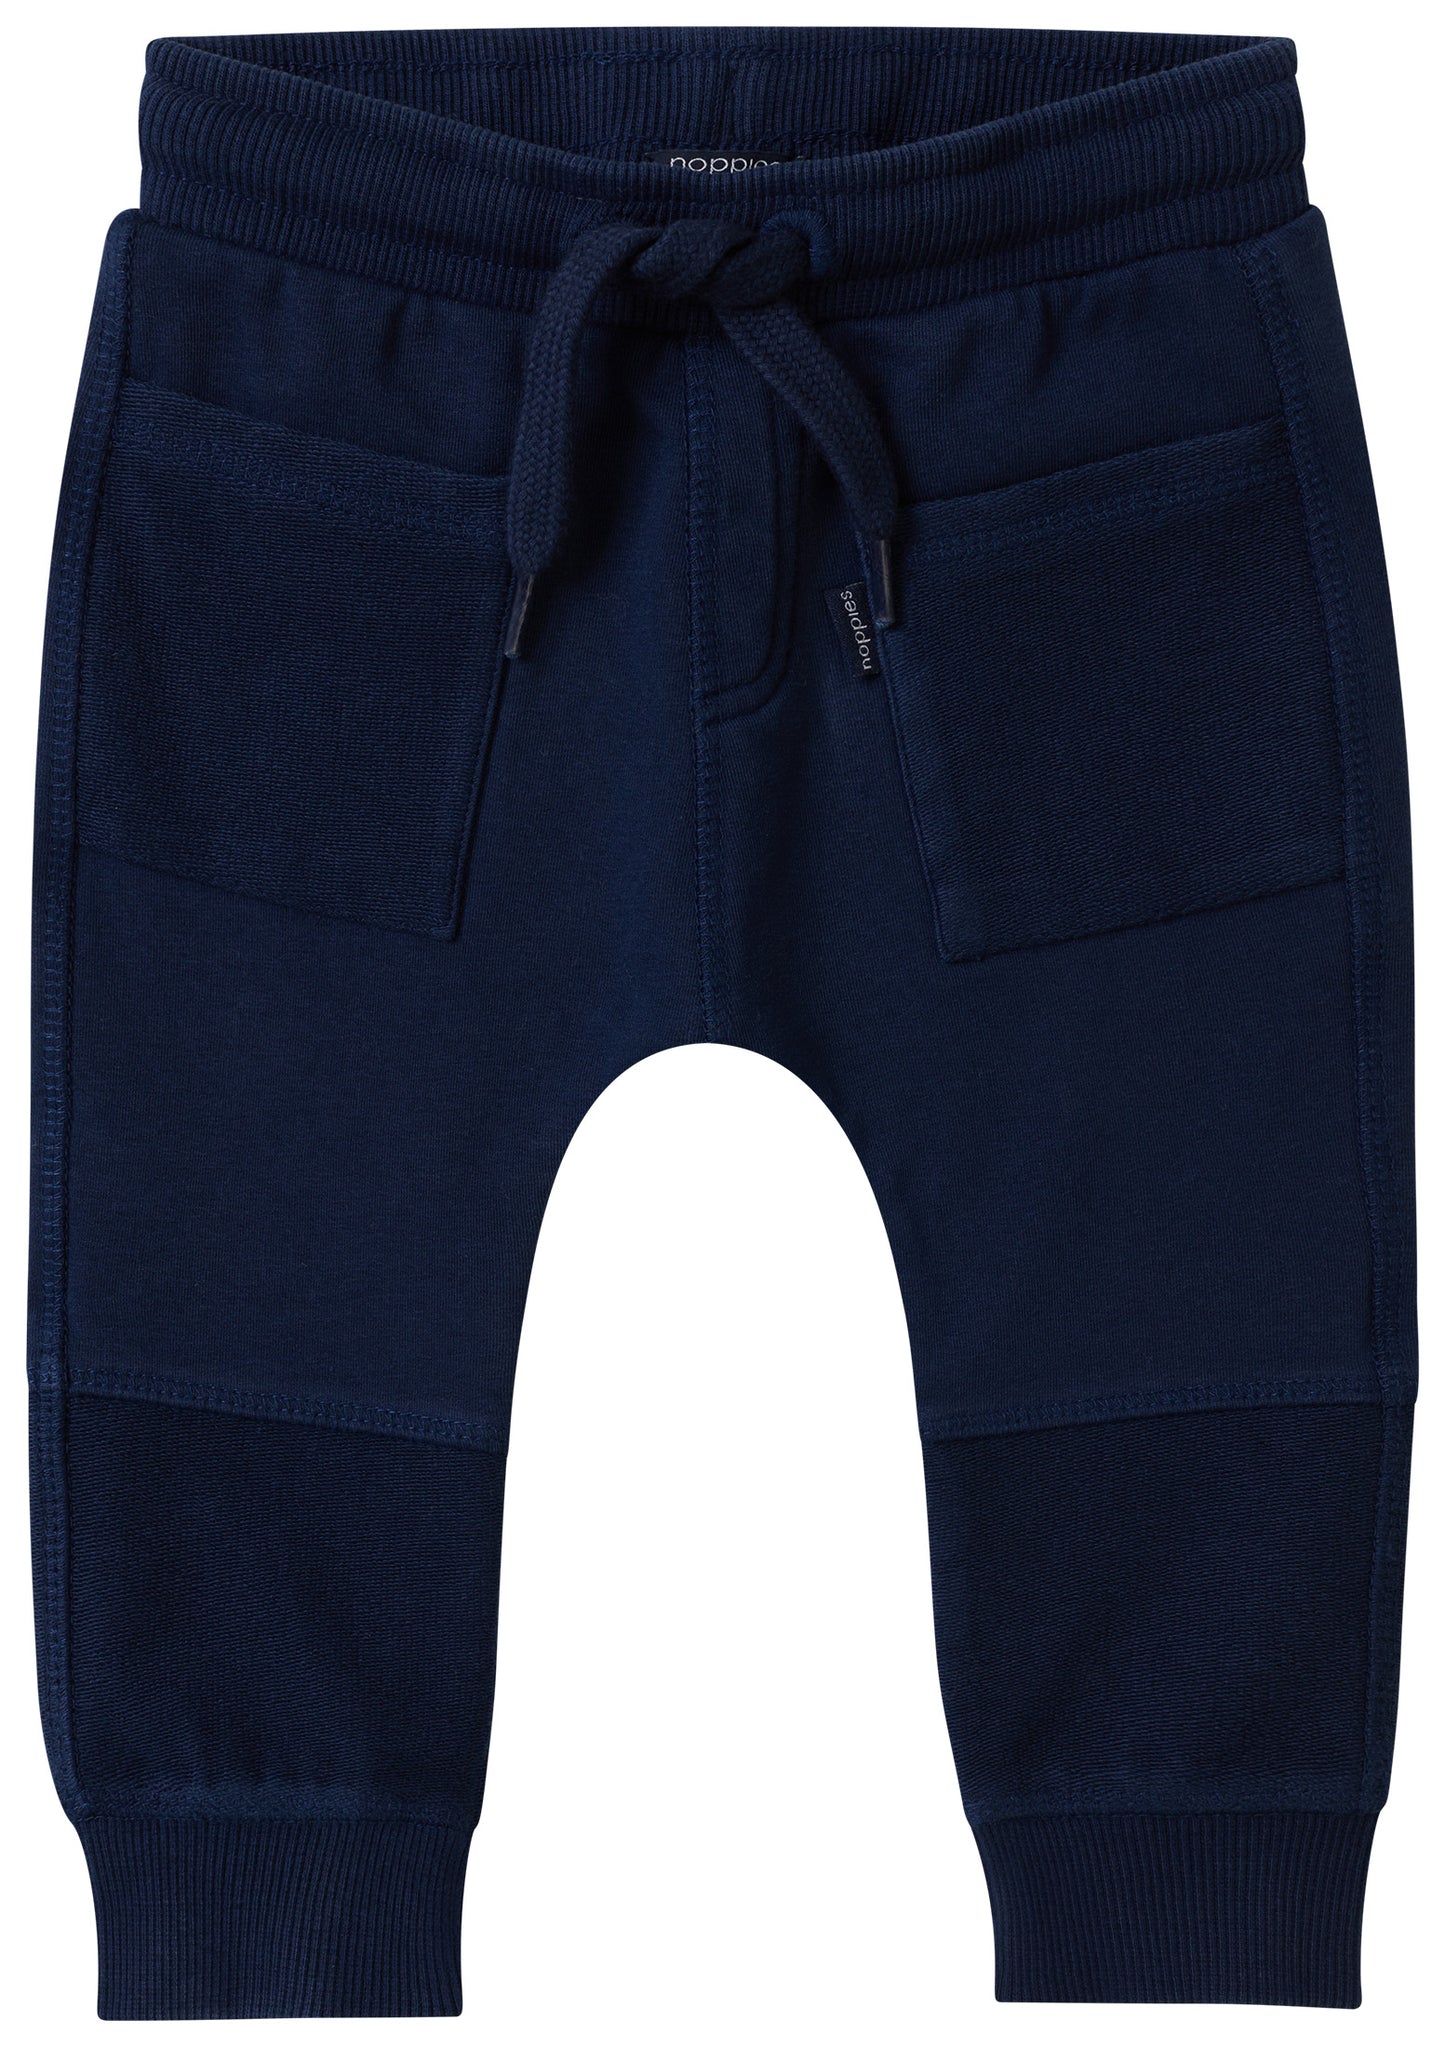 Boys pants Tufton relaxed fit